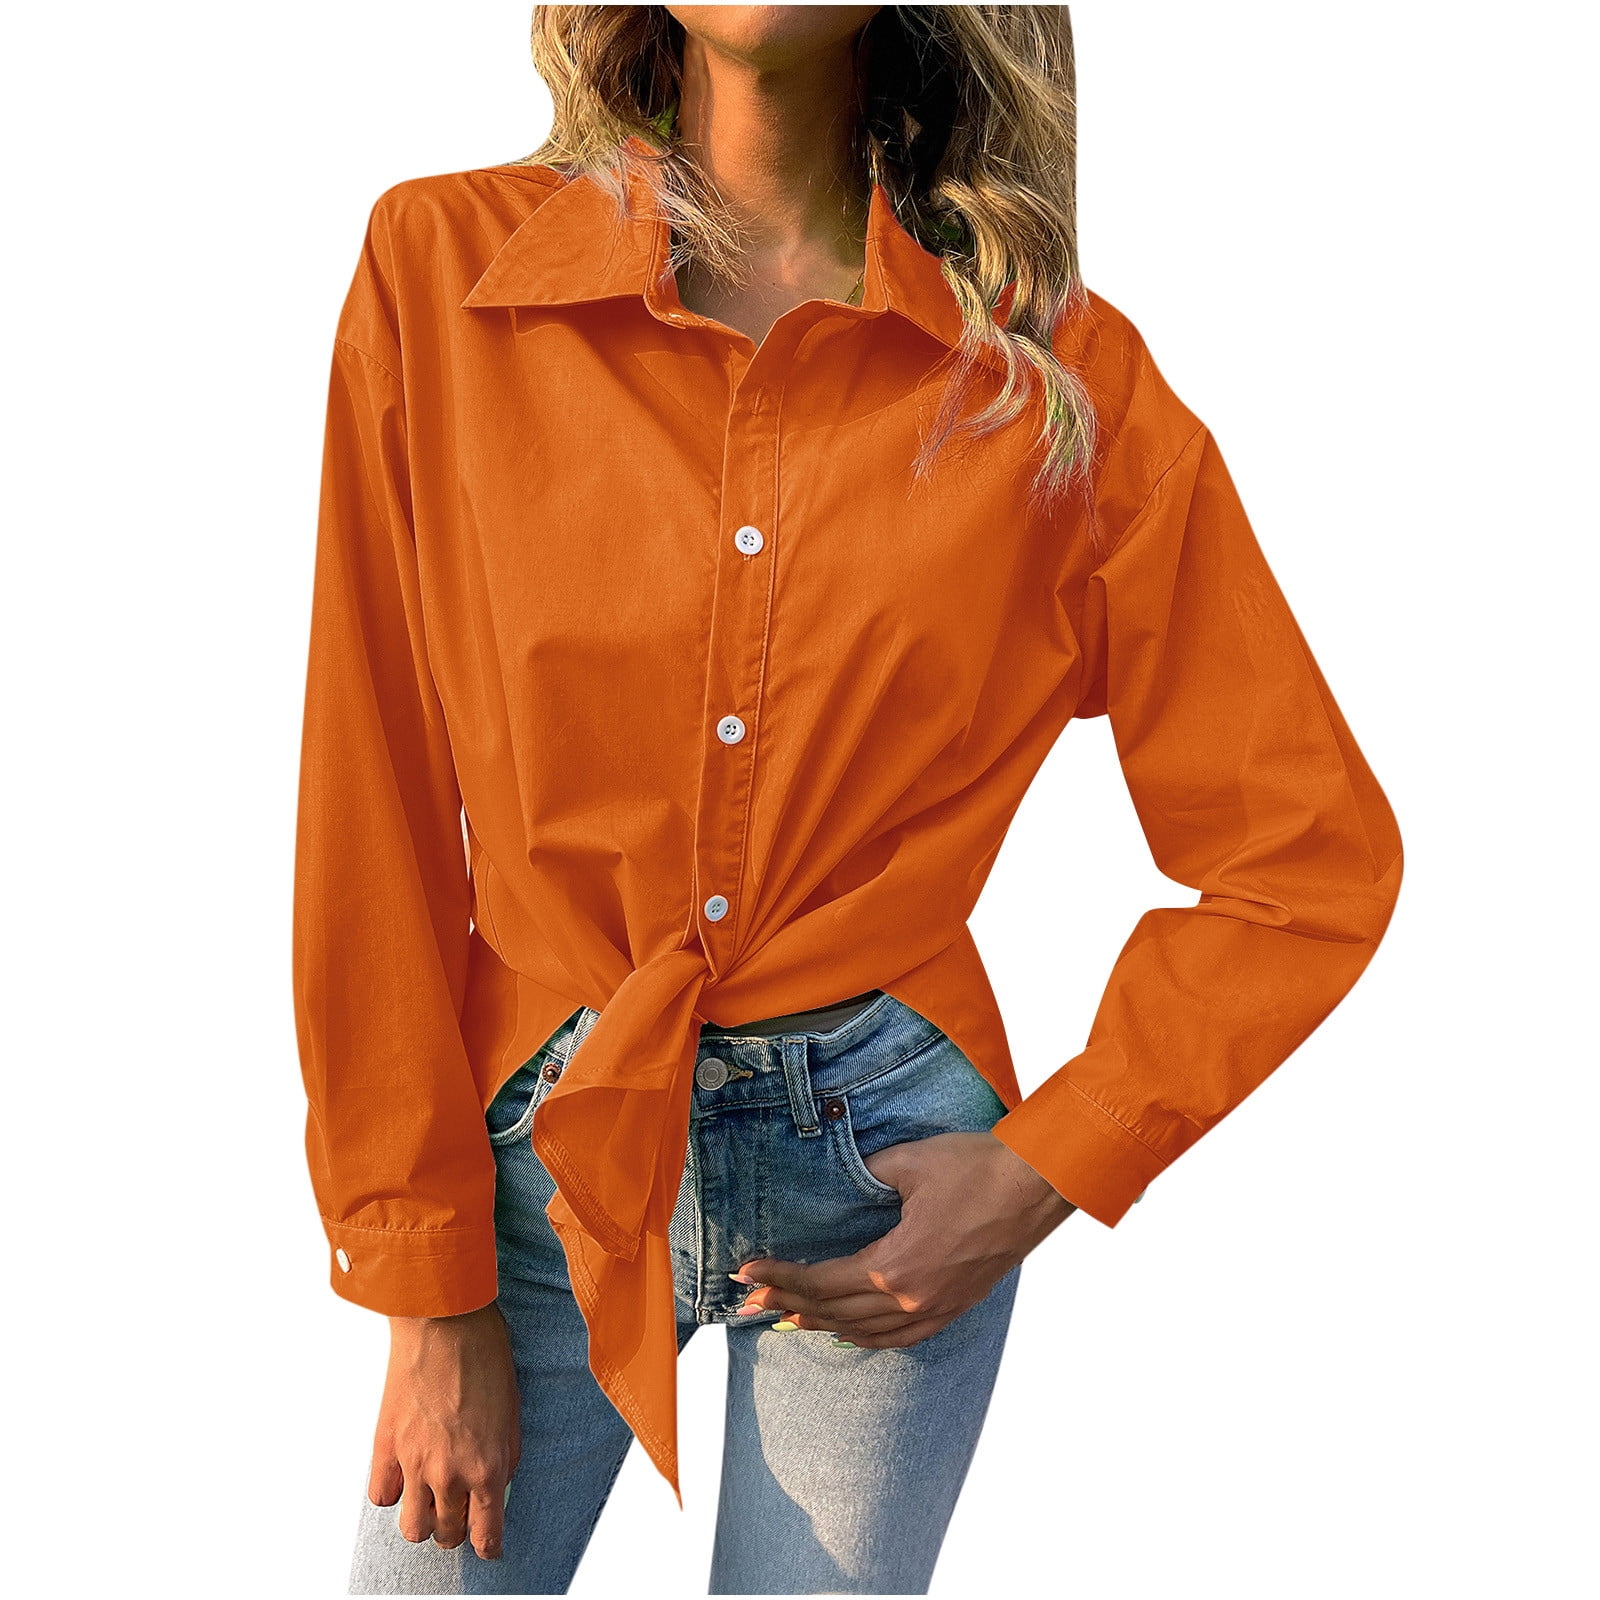 JWZUY Women Solid Color Shirts Casual Long Sleeve V Neck Shirt Button Down  Blouses Top Loose Fit Tshirt Work Tops Basic Workwear Orange L